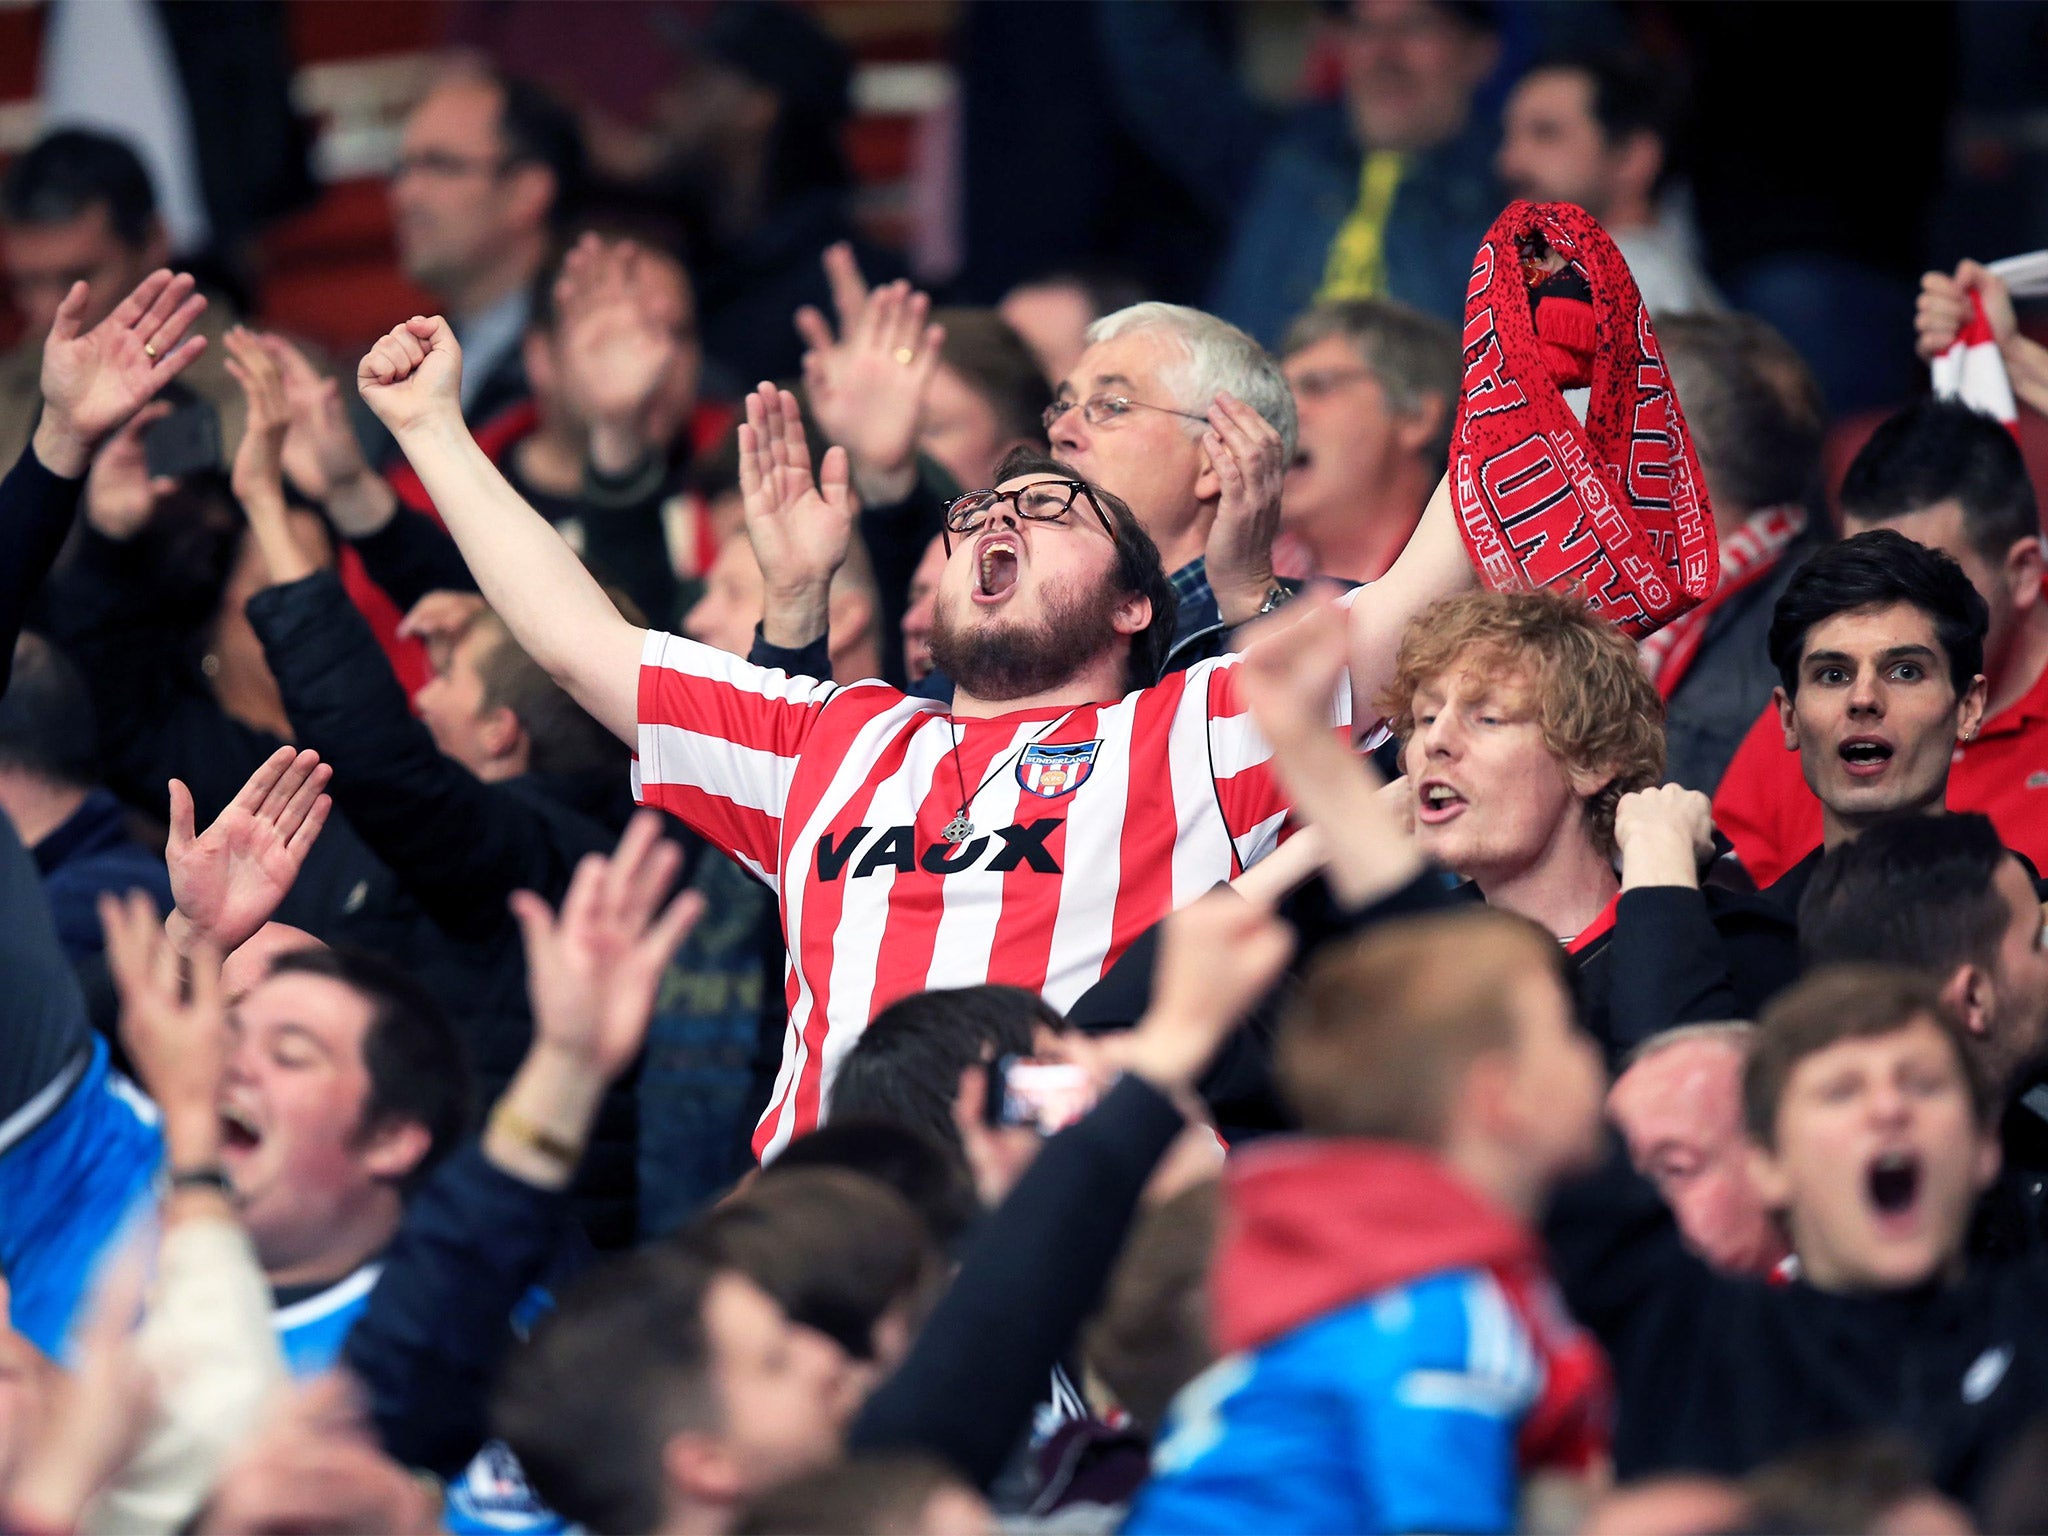 The Sunderland fans erupt as the final whistle is blown